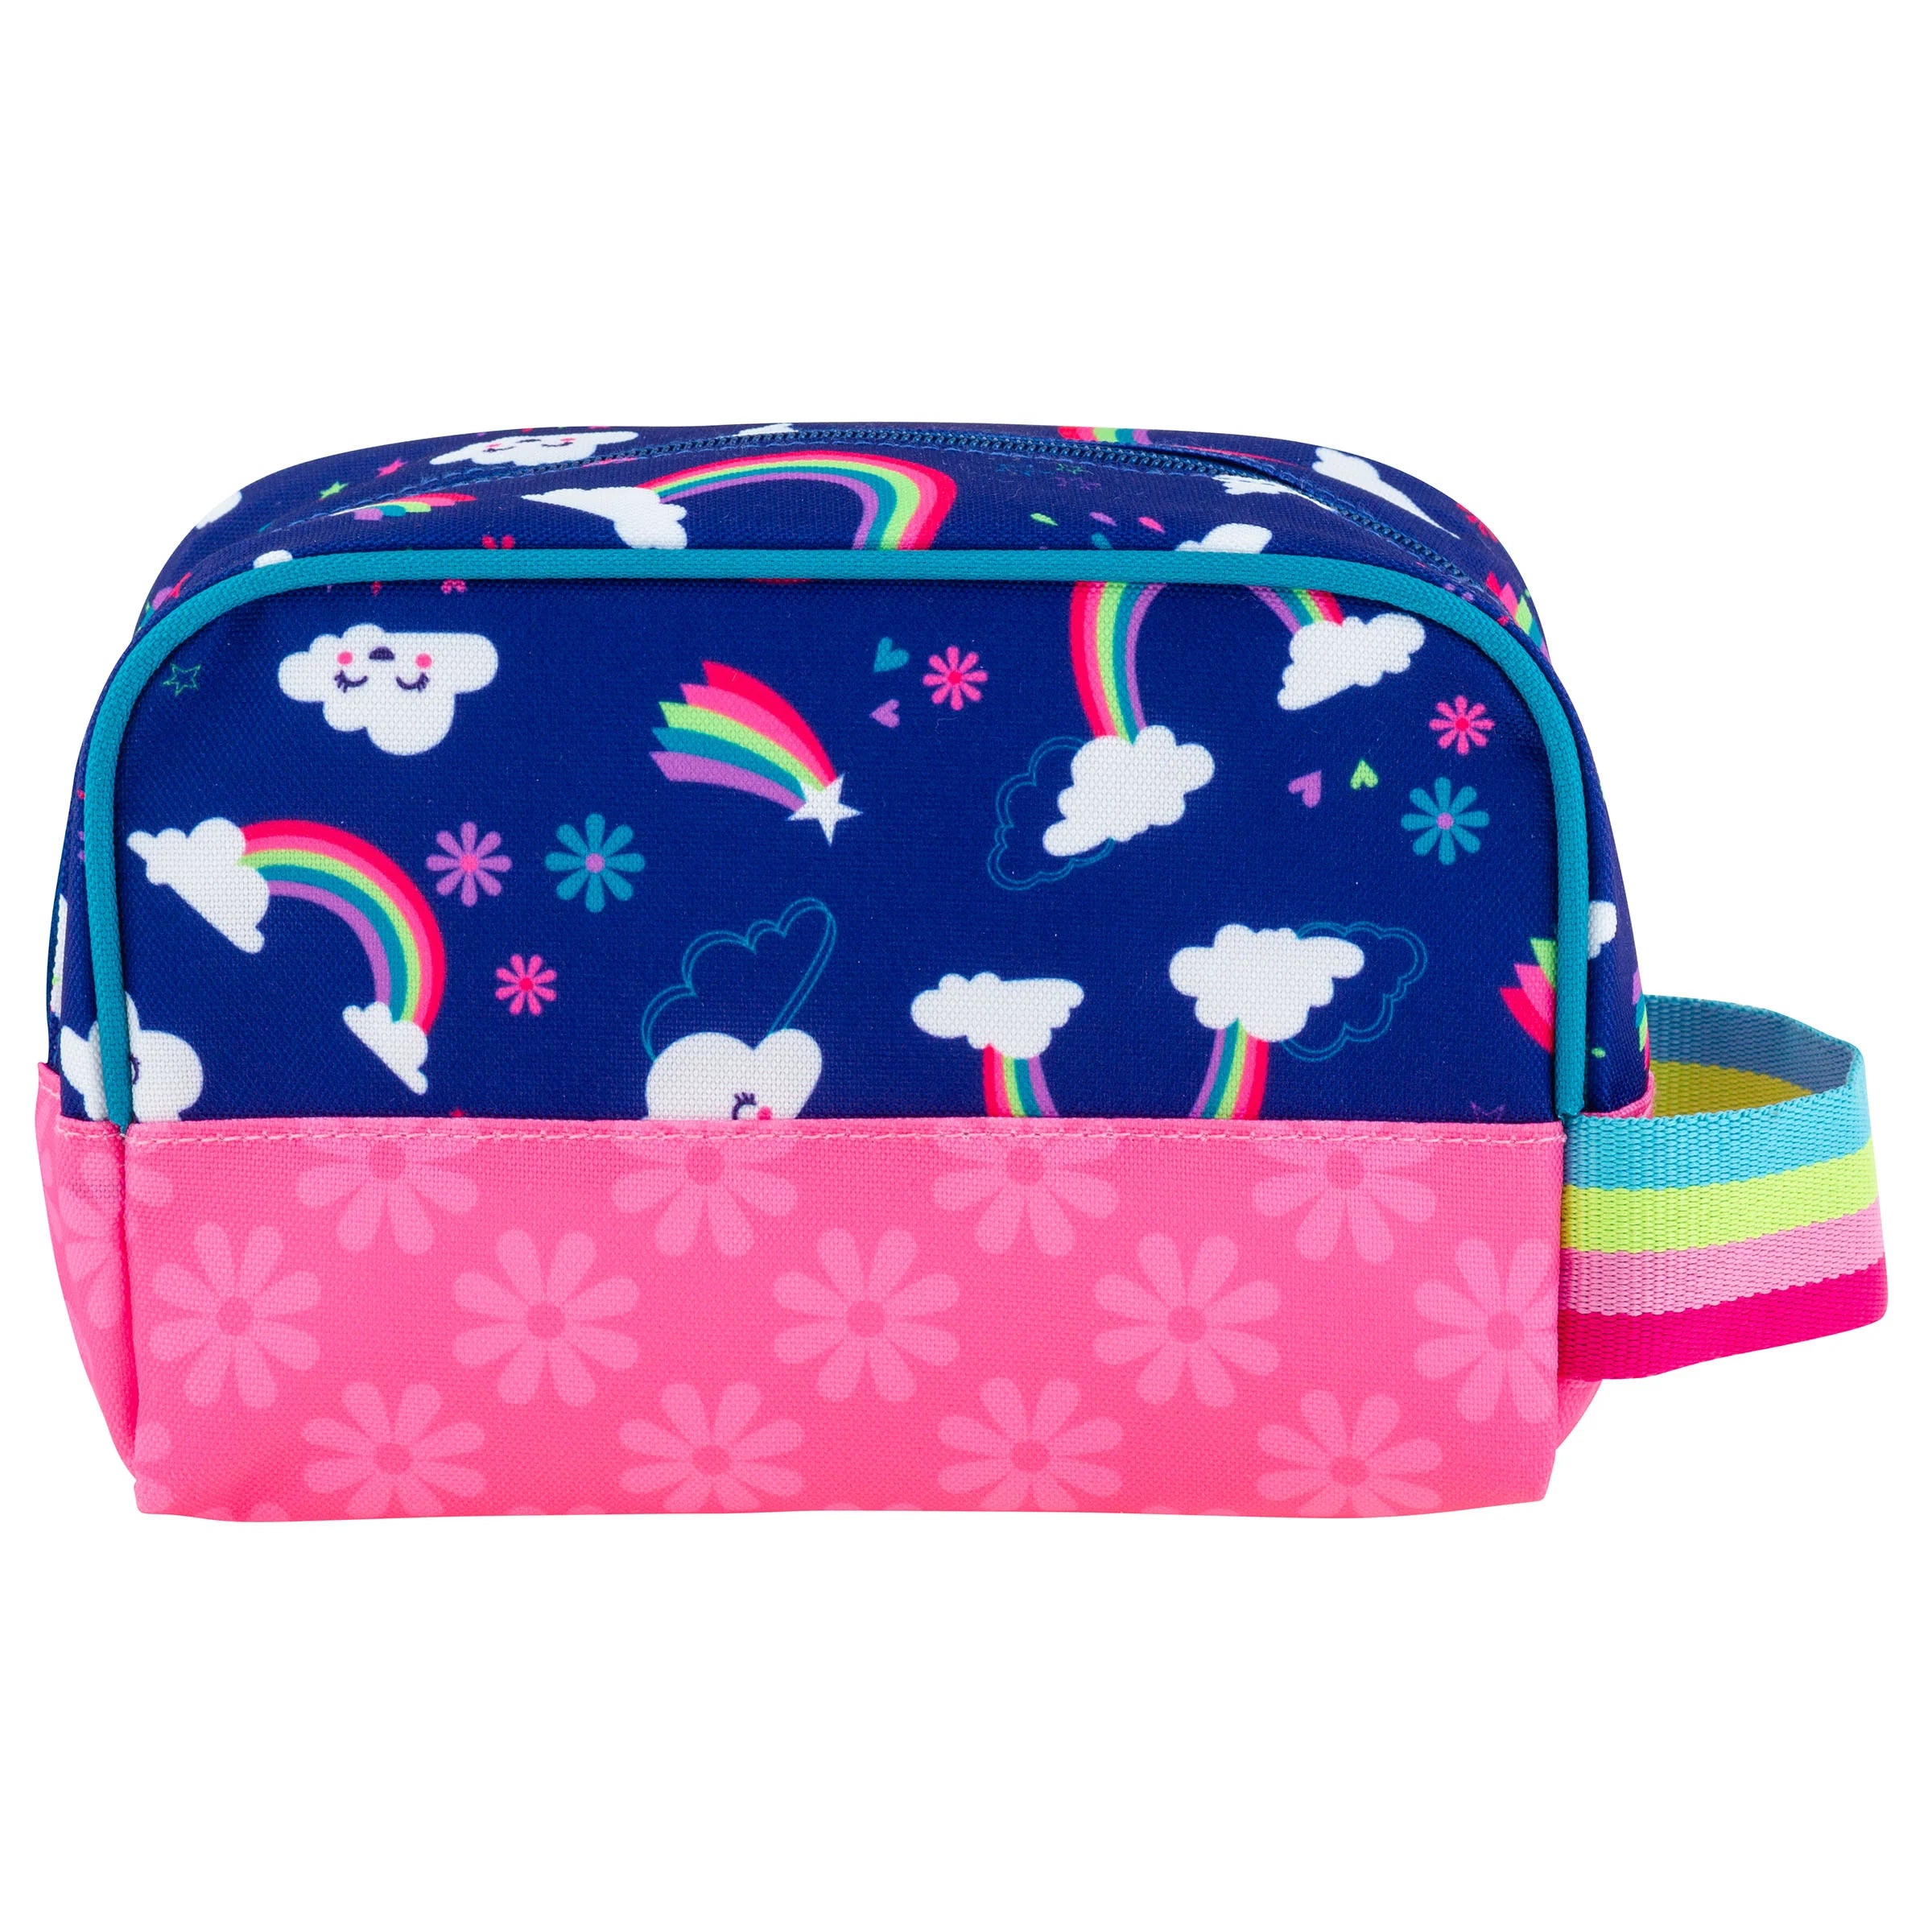 Personalized Toiletry Bag - Rainbow